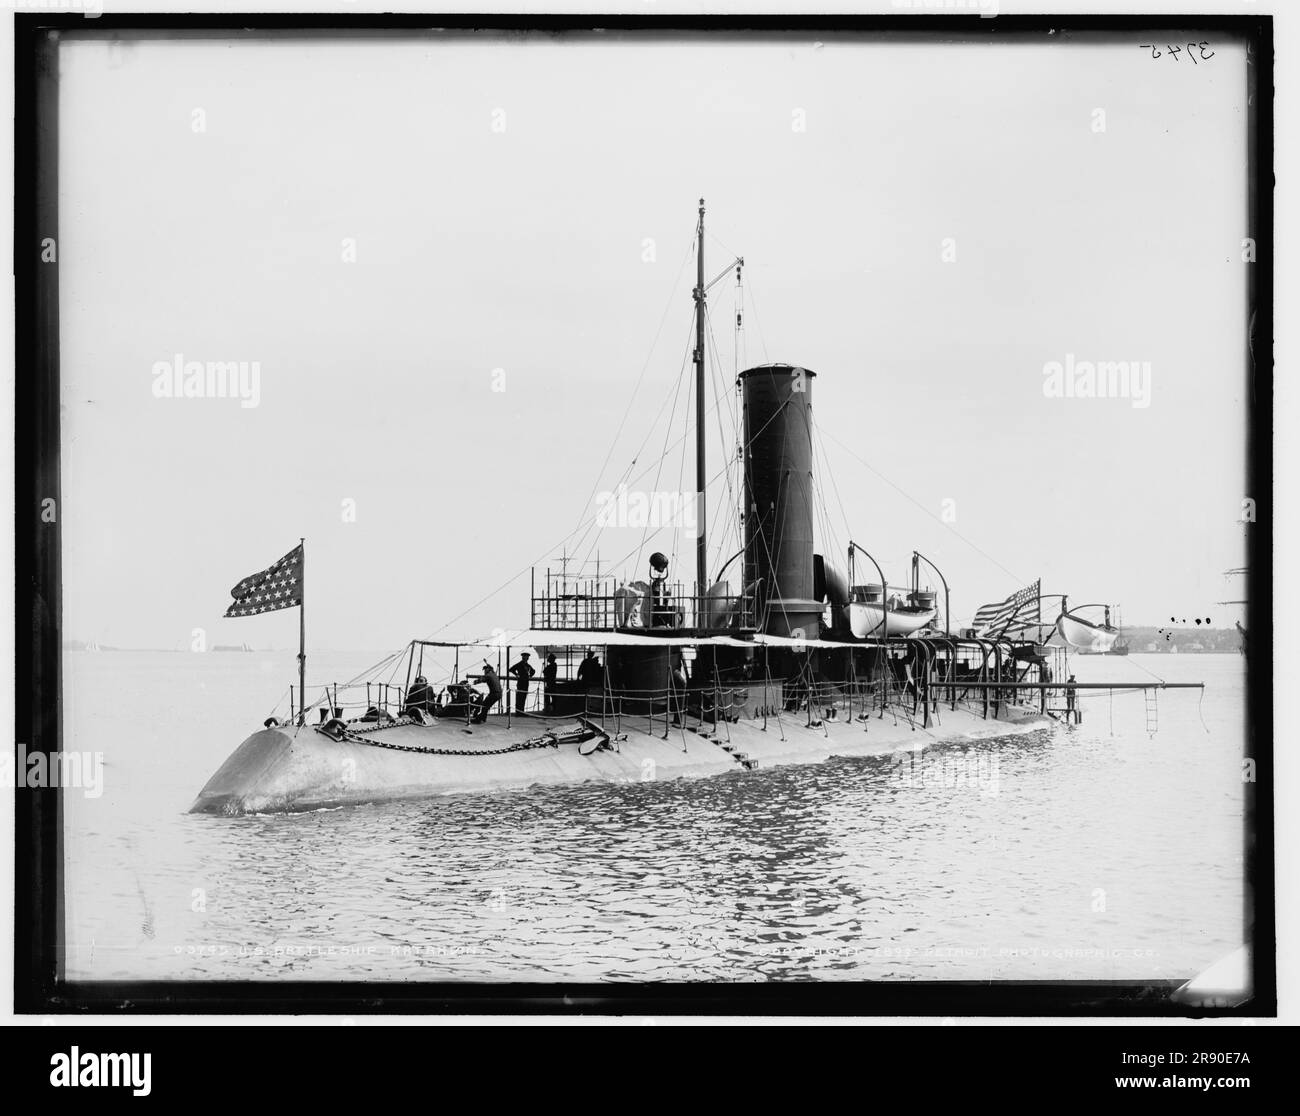 U.S. Battleship [sic] Katahdin, c1899. Showing the ironclad naval ram USS Katahdin, launched 1893 and decommissioned from the U.S. Navy in 1909. Her hull embodied several new features later used in early submarines. Stock Photo